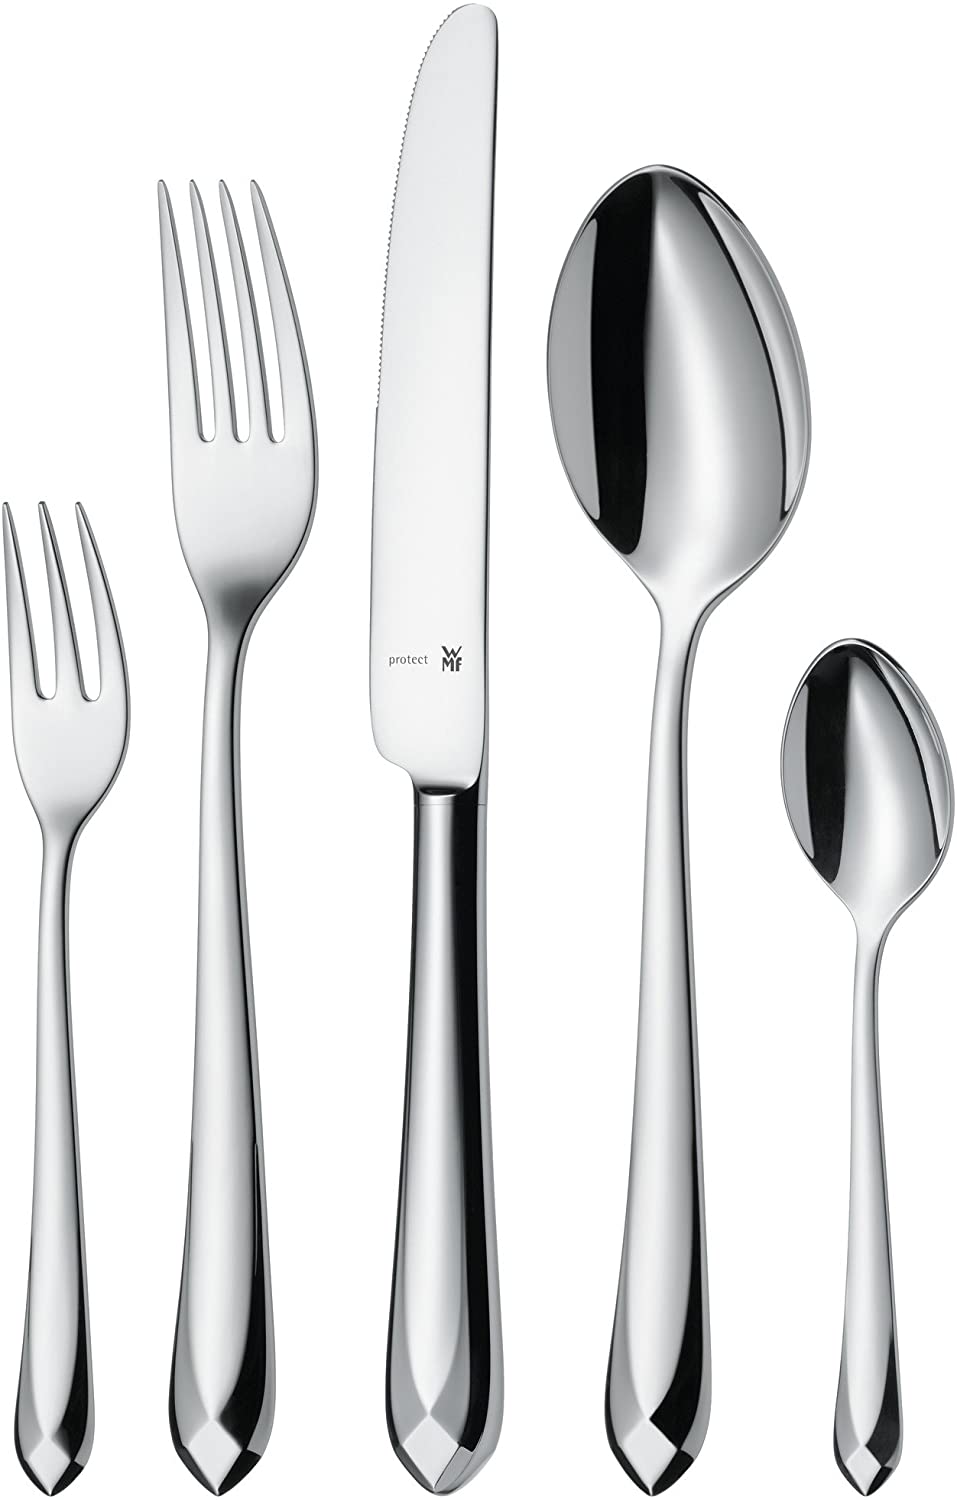 WMF Jette cutlery set, 30-piece, 6 persons, Cromargan protect